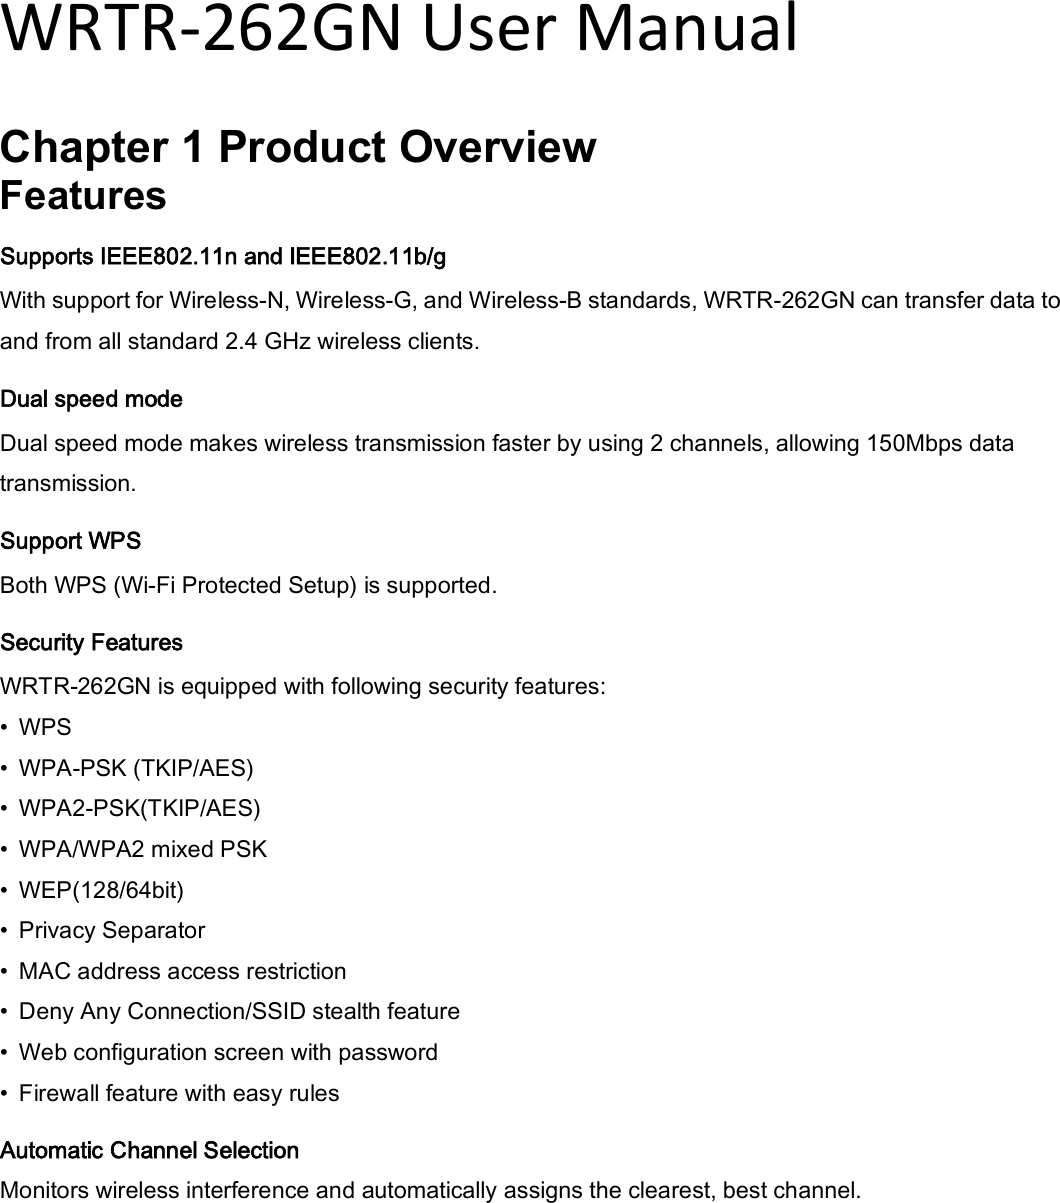 WRTR-262GN User Manual  Chapter 1 Product Overview Features Supports IEEE802.11n and IEEE802.11b/g With support for Wireless-N, Wireless-G, and Wireless-B standards, WRTR-262GN can transfer data to and from all standard 2.4 GHz wireless clients.   Dual speed mode Dual speed mode makes wireless transmission faster by using 2 channels, allowing 150Mbps data transmission. Support WPS Both WPS (Wi-Fi Protected Setup) is supported.   Security Features WRTR-262GN is equipped with following security features:   •  WPS   •  WPA-PSK (TKIP/AES)   •  WPA2-PSK(TKIP/AES)   •  WPA/WPA2 mixed PSK   •  WEP(128/64bit)   •  Privacy Separator   •  MAC address access restriction   •  Deny Any Connection/SSID stealth feature   •  Web configuration screen with password   •  Firewall feature with easy rules Automatic Channel Selection Monitors wireless interference and automatically assigns the clearest, best channel.   